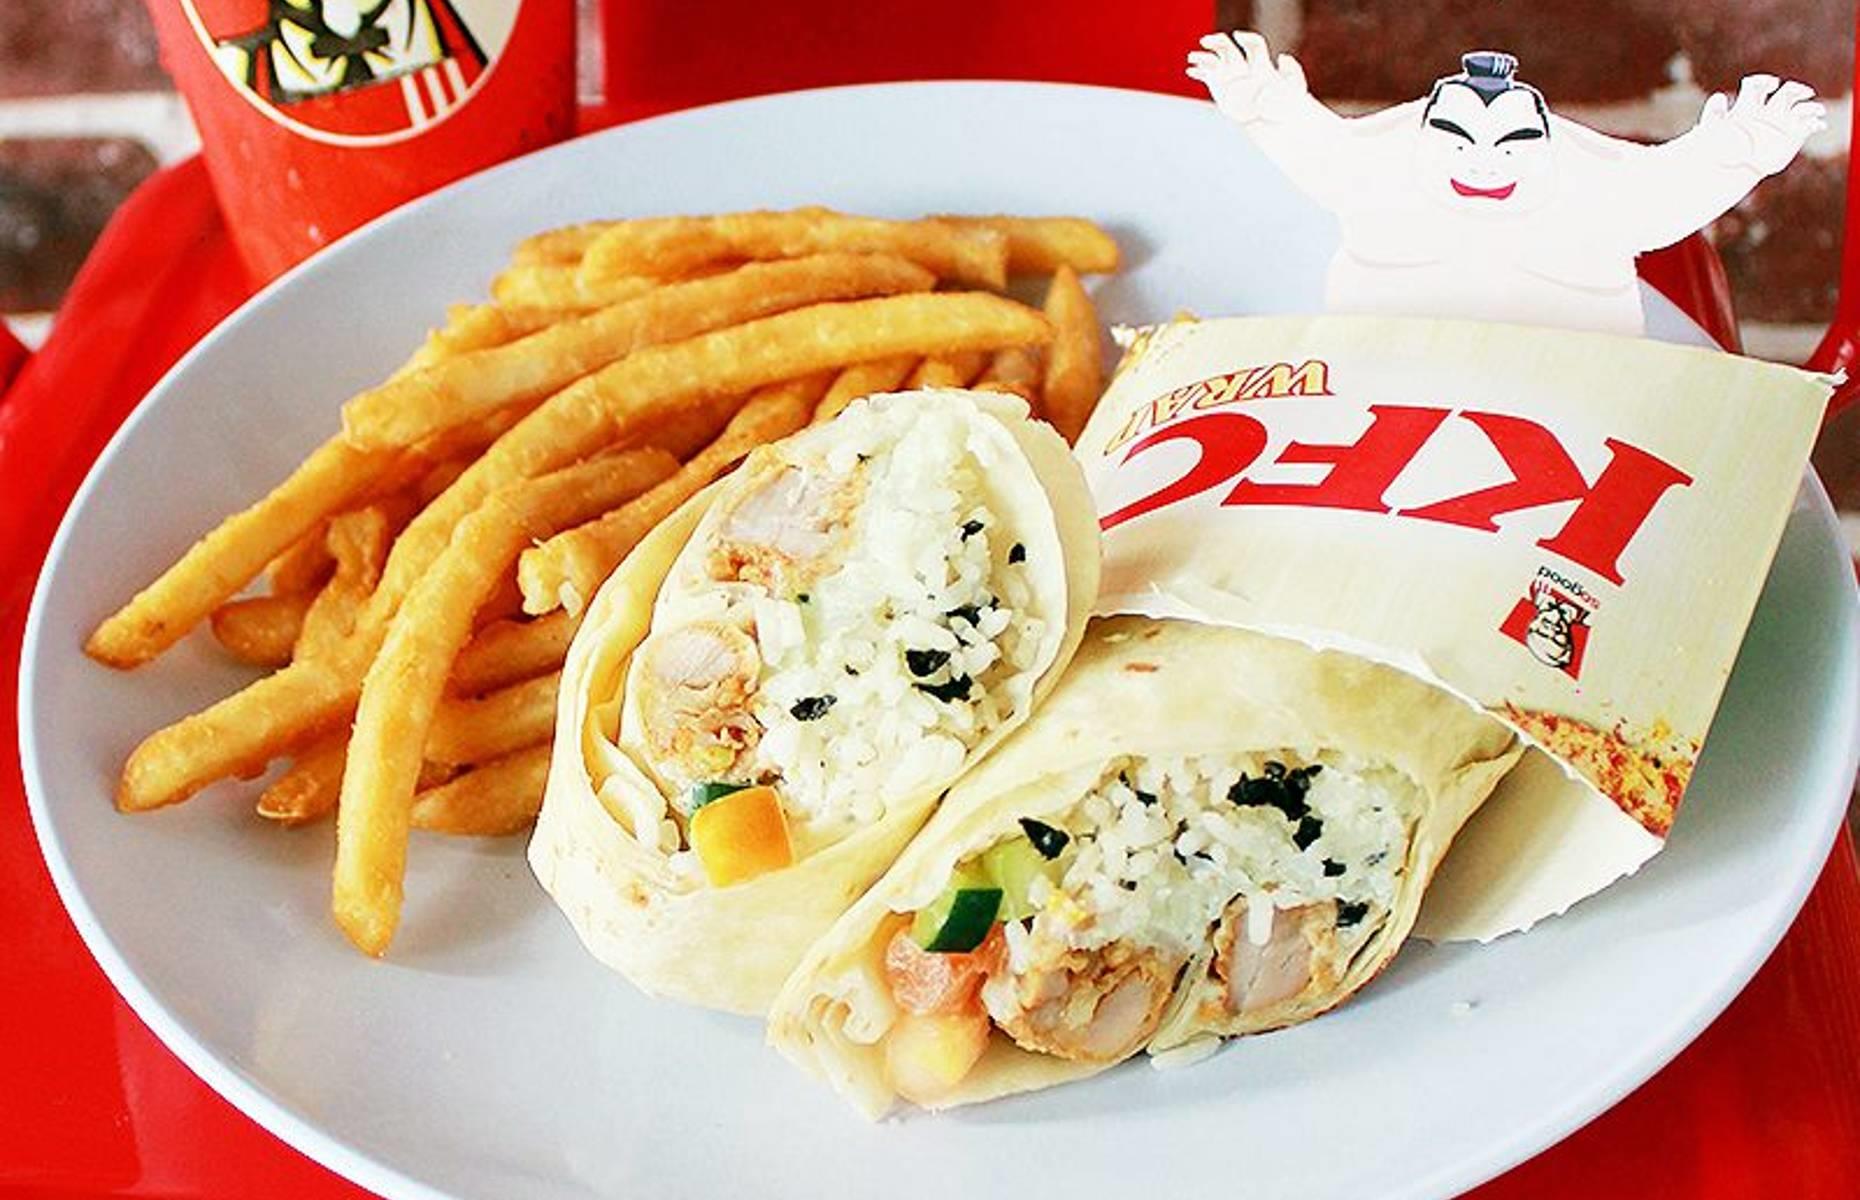 <p>The Wasabi Rice Wrap was a toasted tortilla wrap encompassing savory seaweed rice, spicy wasabi mayo, crunchy cucumber strips, diced tomato and crispy chicken. Available for a limited time at KFC in Malaysia in 2016, the rule-breaking on-the-go meal was targeted at the younger generations.</p>